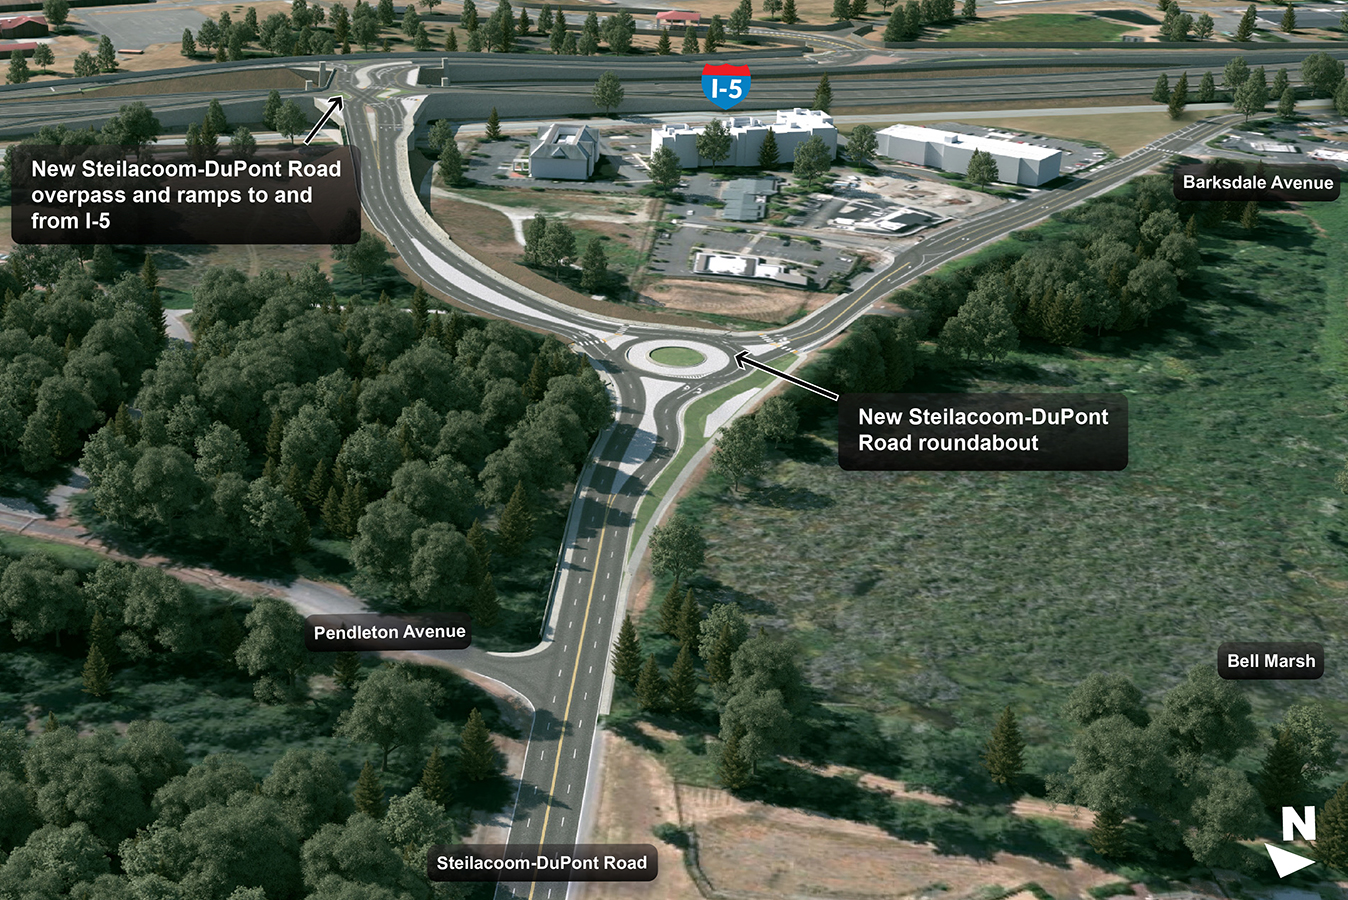 Map showing how the new roundabout will connect to the new Steilacoom-DuPont overpass and on- and off-ramps to and from I-5